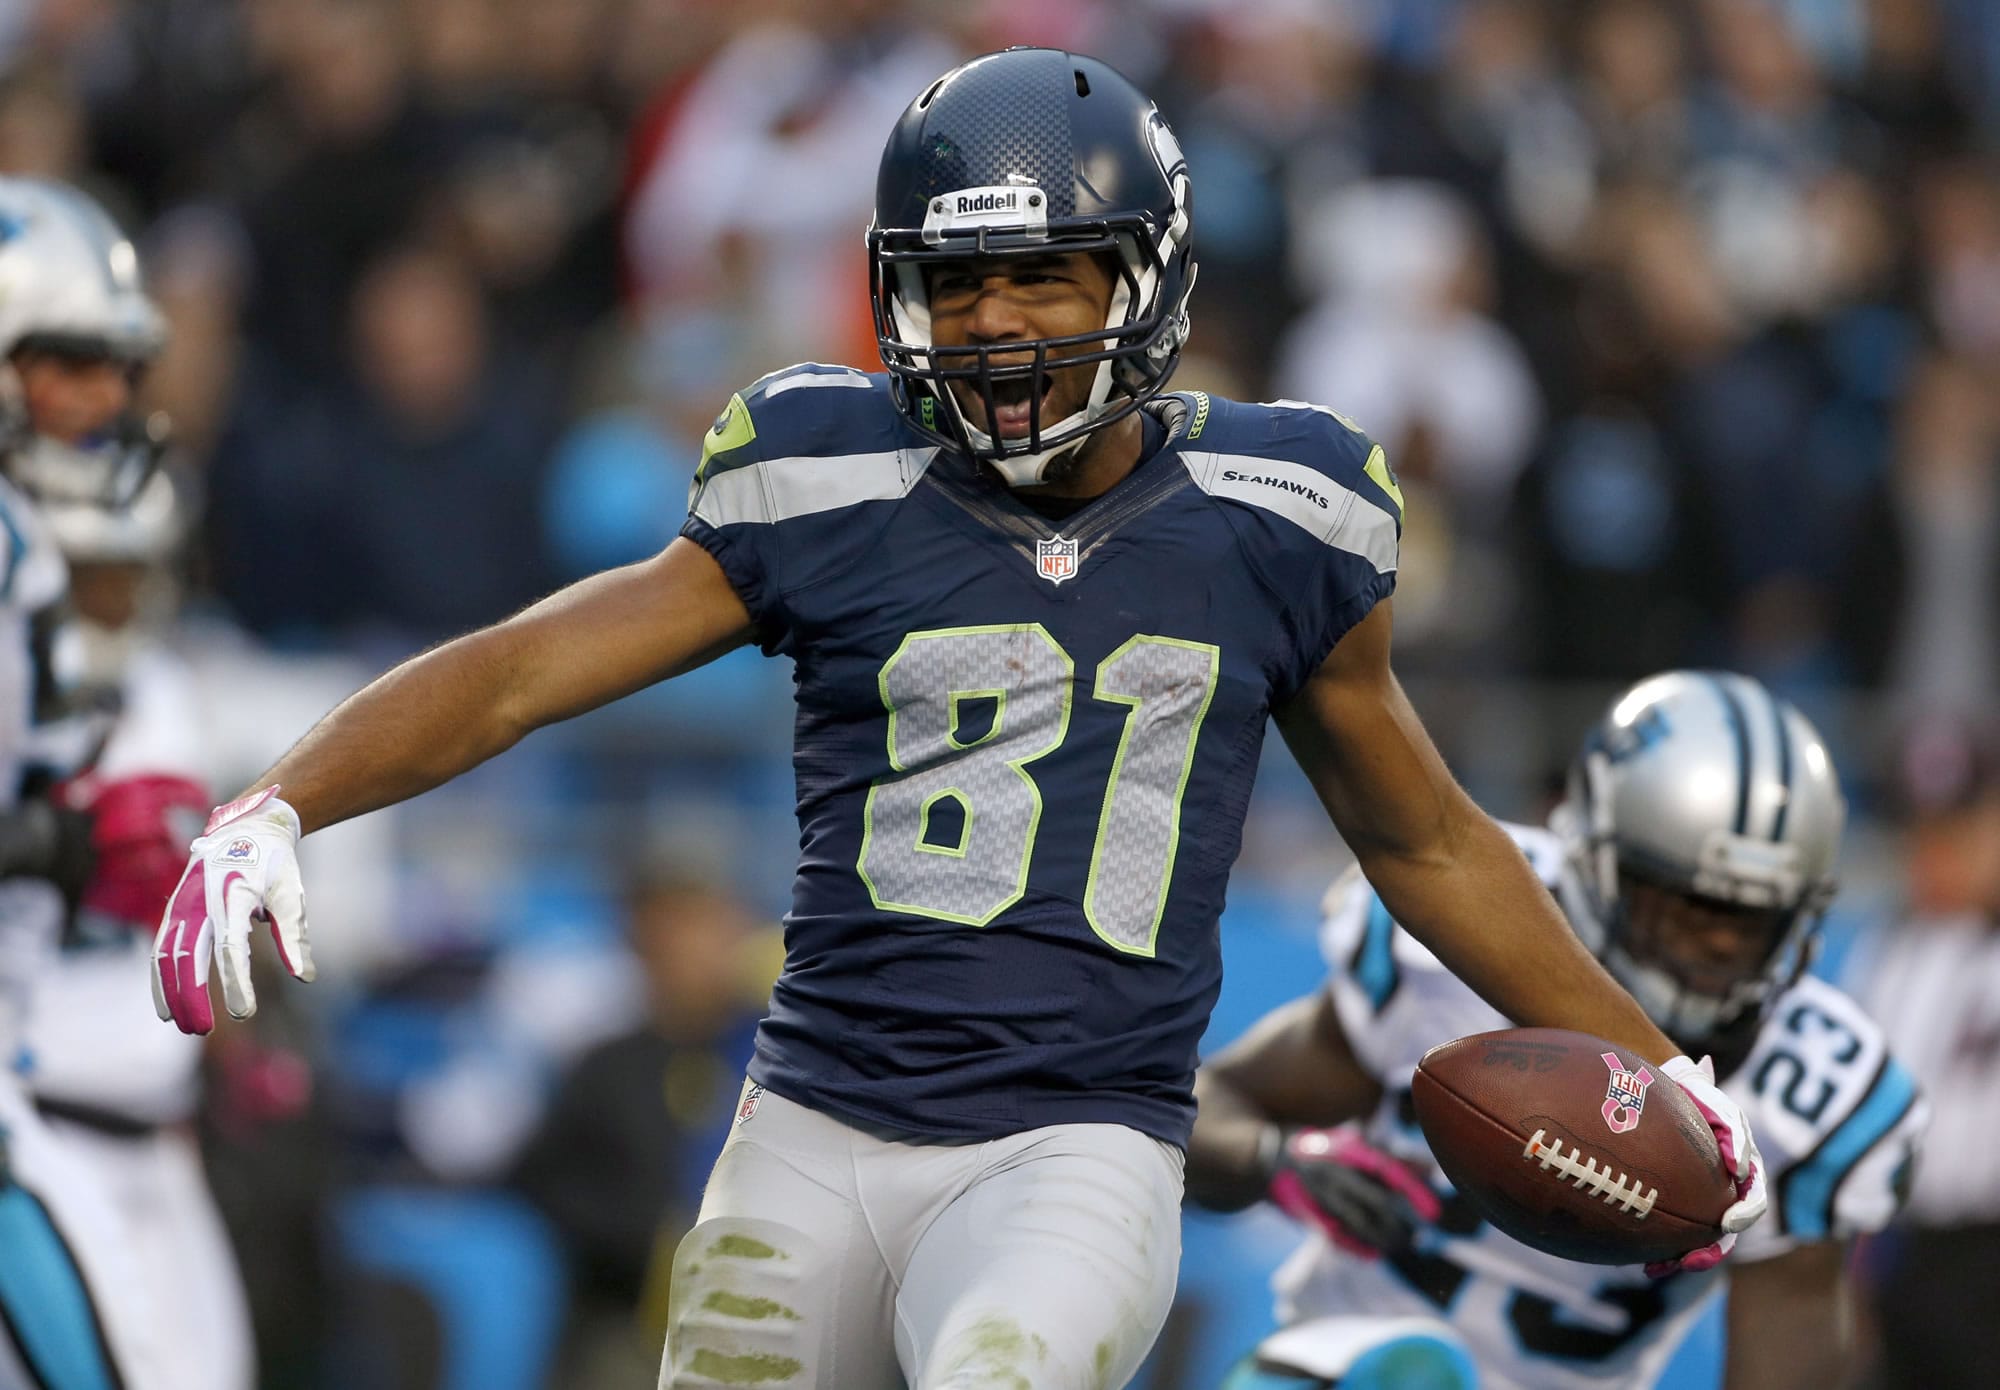 Seattle Seahawks' Golden Tate (81) reacts after his touchdown catch against the Carolina Panthers during the third quarter of an NFL football game in Charlotte, N.C., Sunday, Oct. 7, 2012.